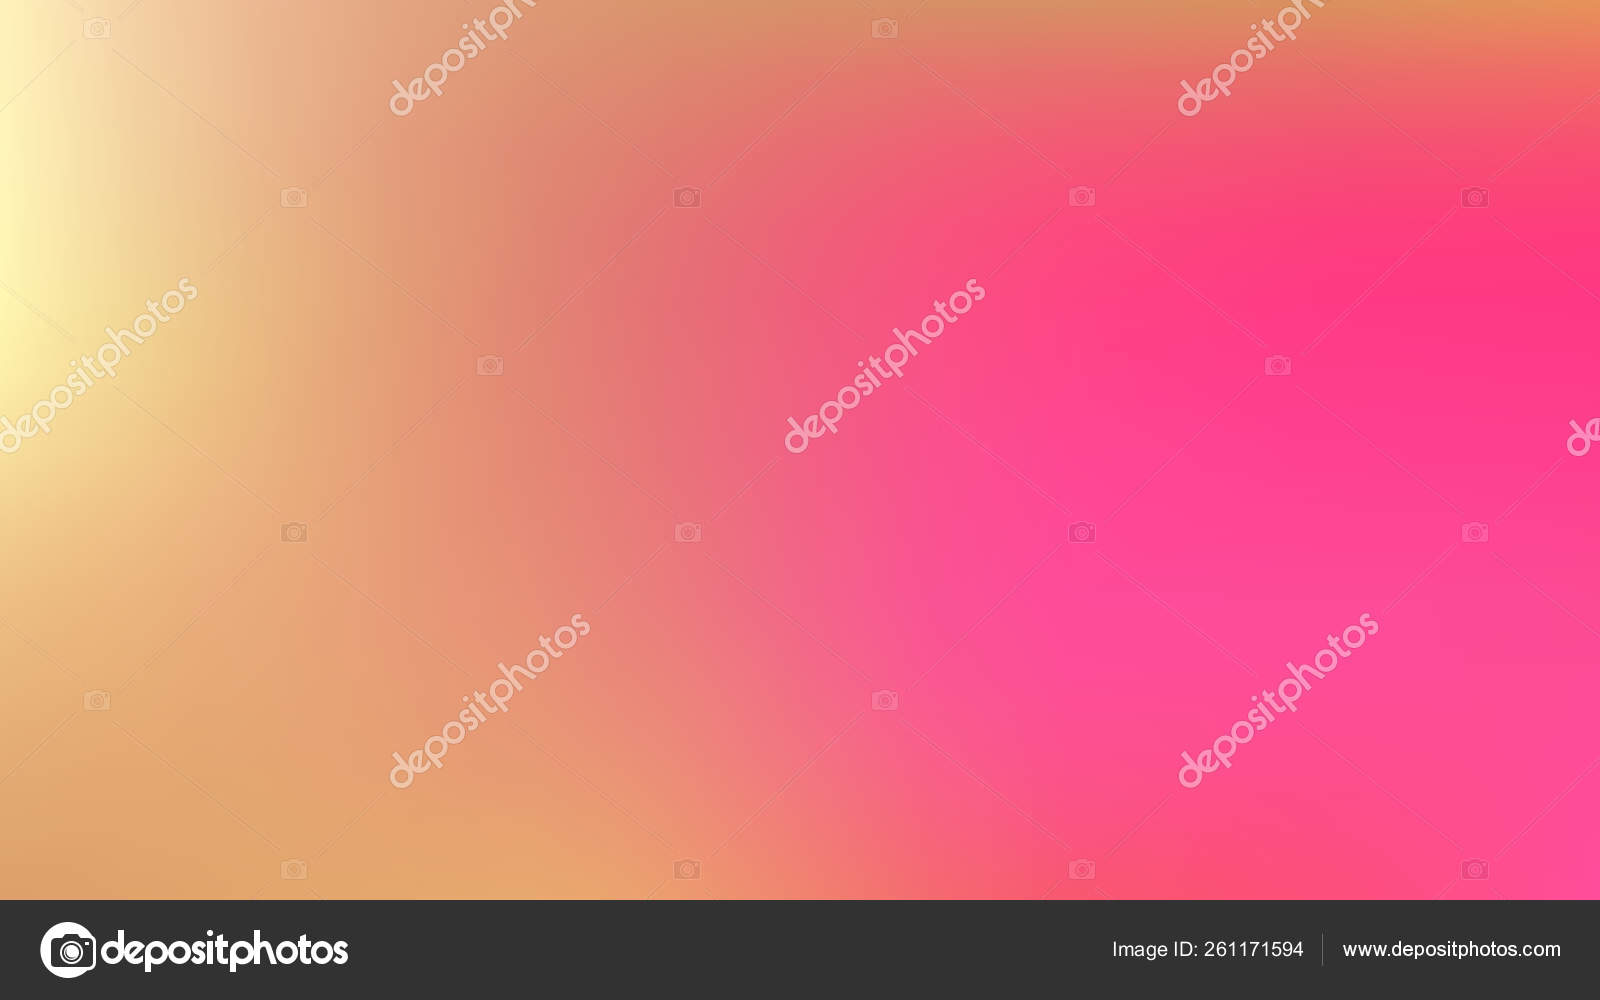 Pink And Yellow Powerpoint Background Design Stock Vector